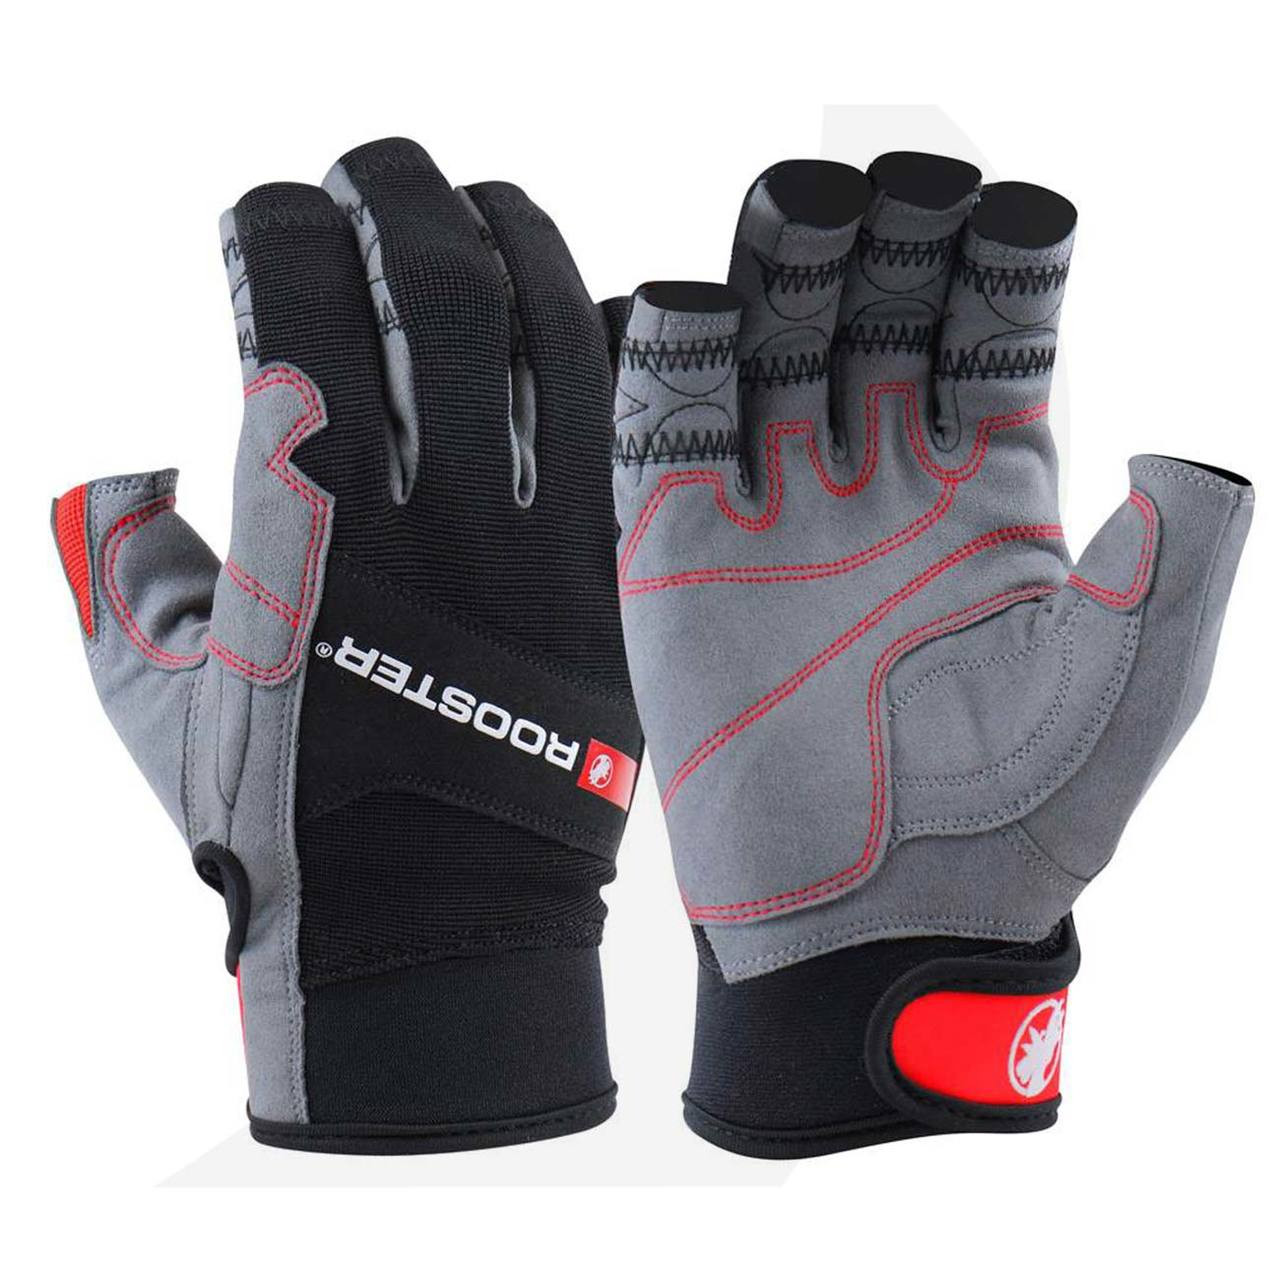 Rooster Dura Pro 5 Finger Cut Glove